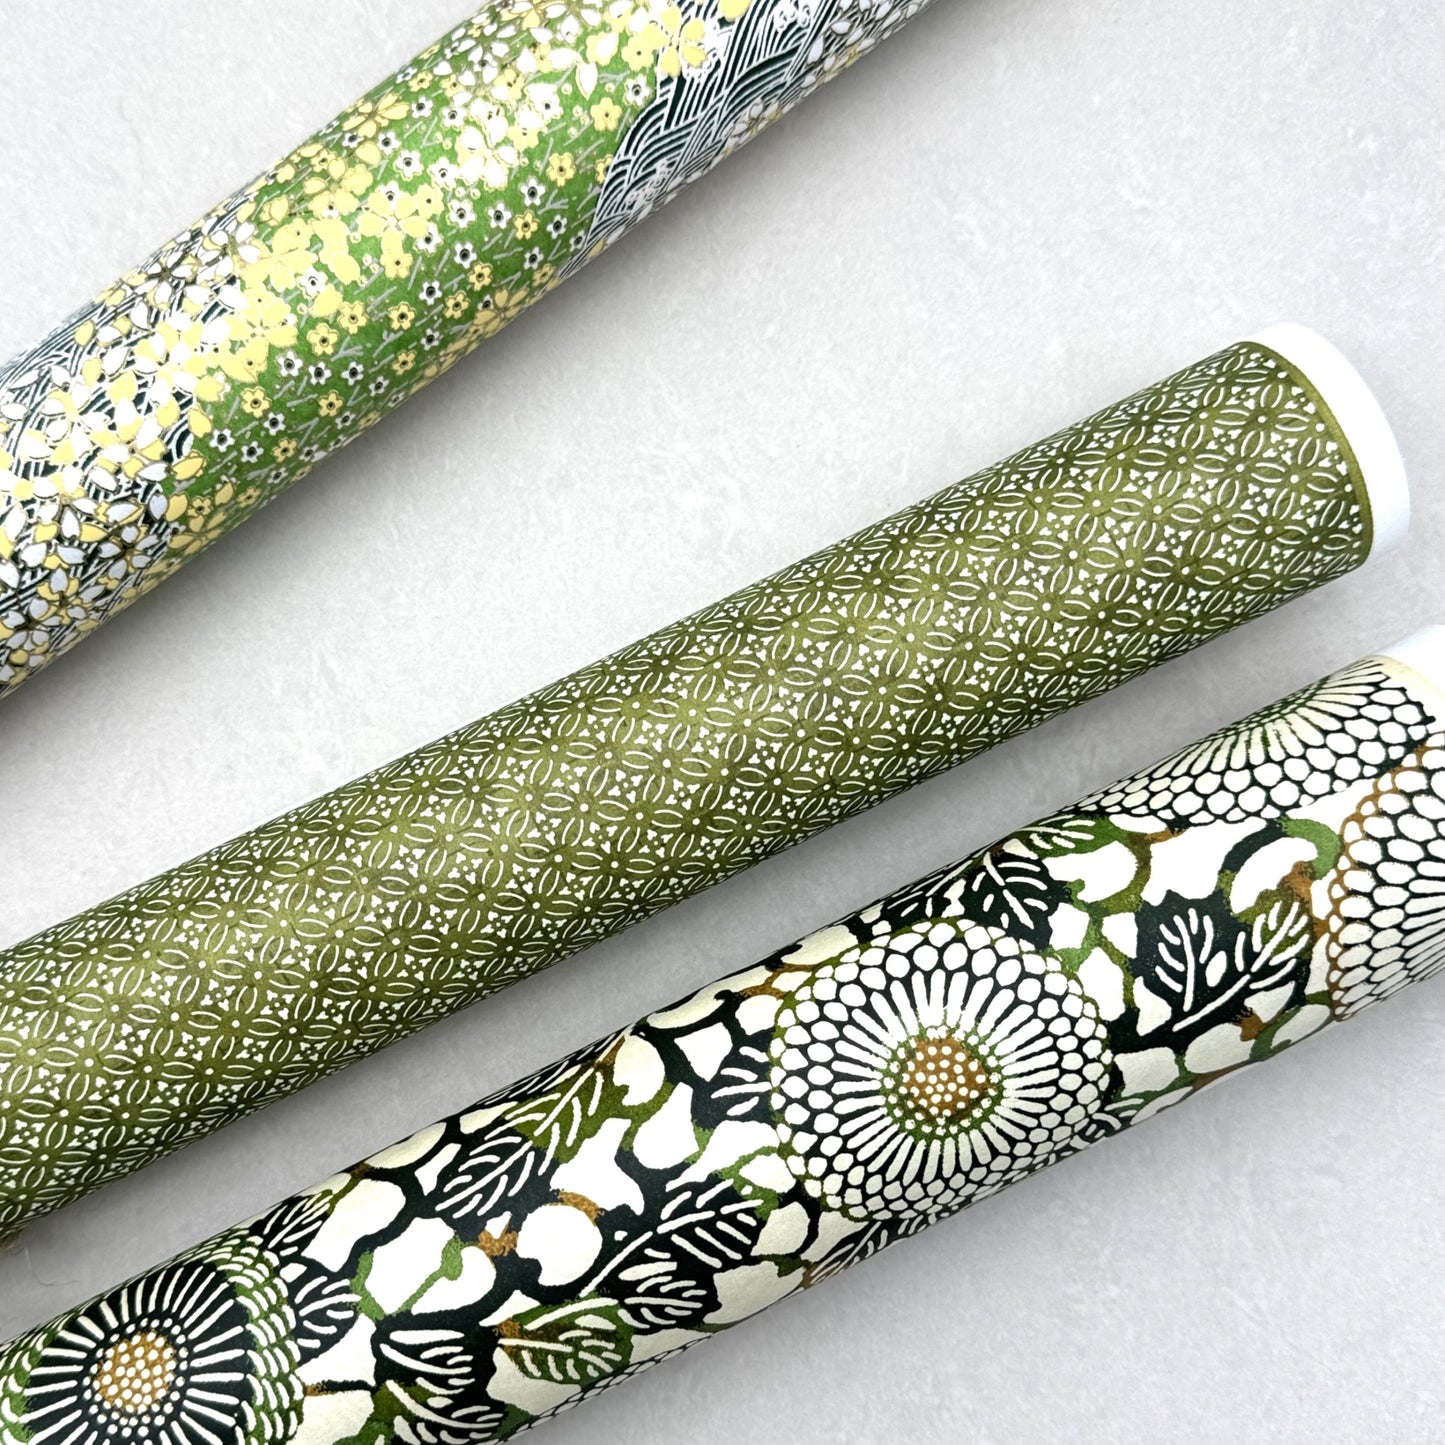 Japanese silkscreen chiyogami paper with a repeat pattern of stylised chrysanthemum flowers in tones of deep green on a buttermilk cream backdrop. Pictured rolled with other green patterned papers